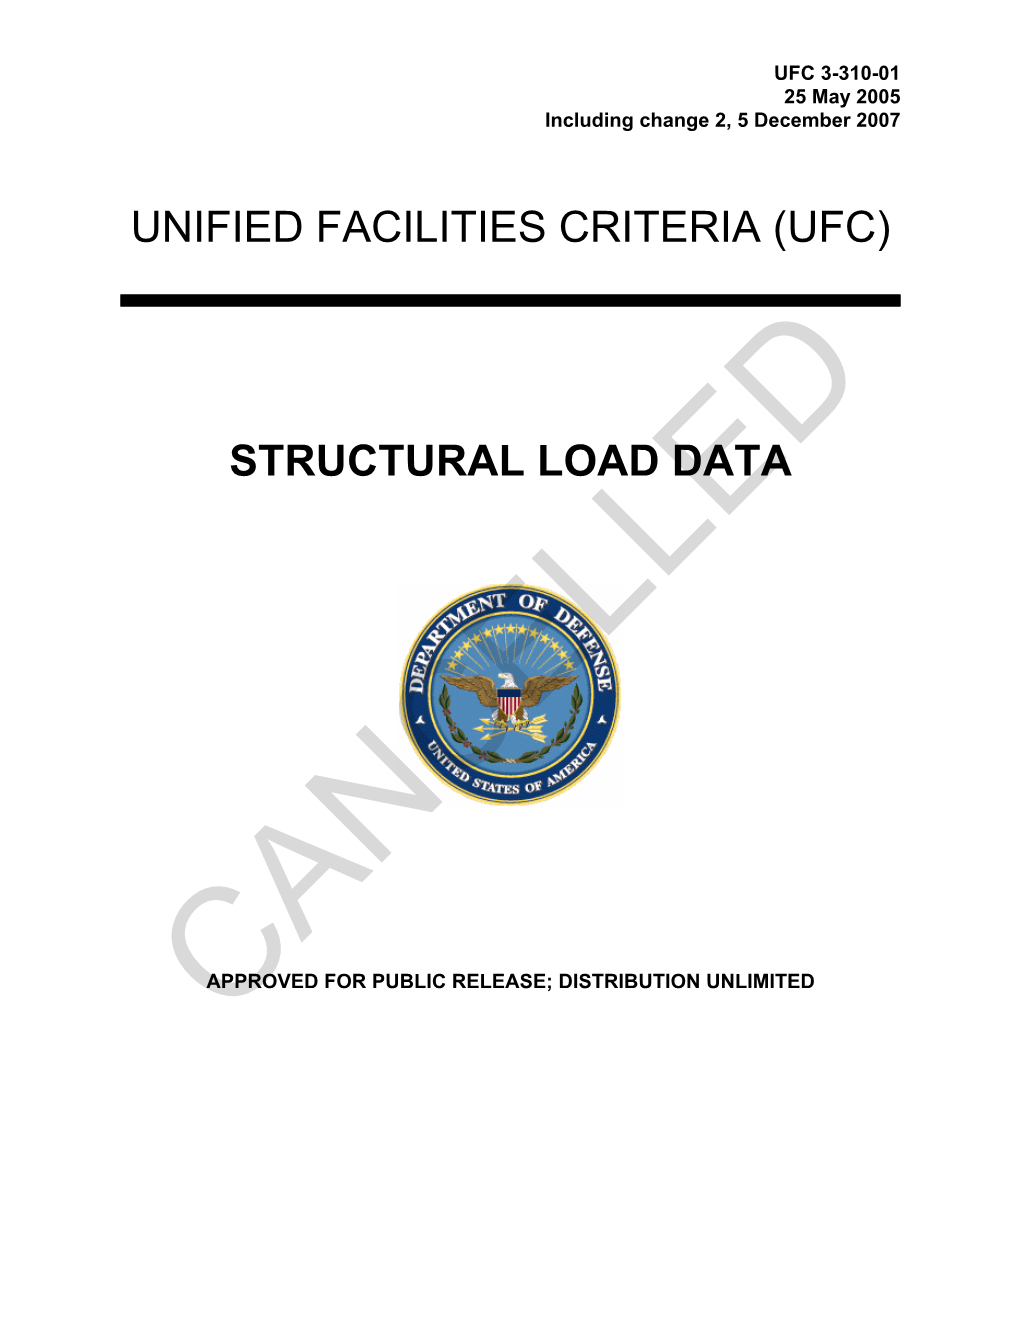 UFC 3-310-01 Structural Load Data, with Change 2